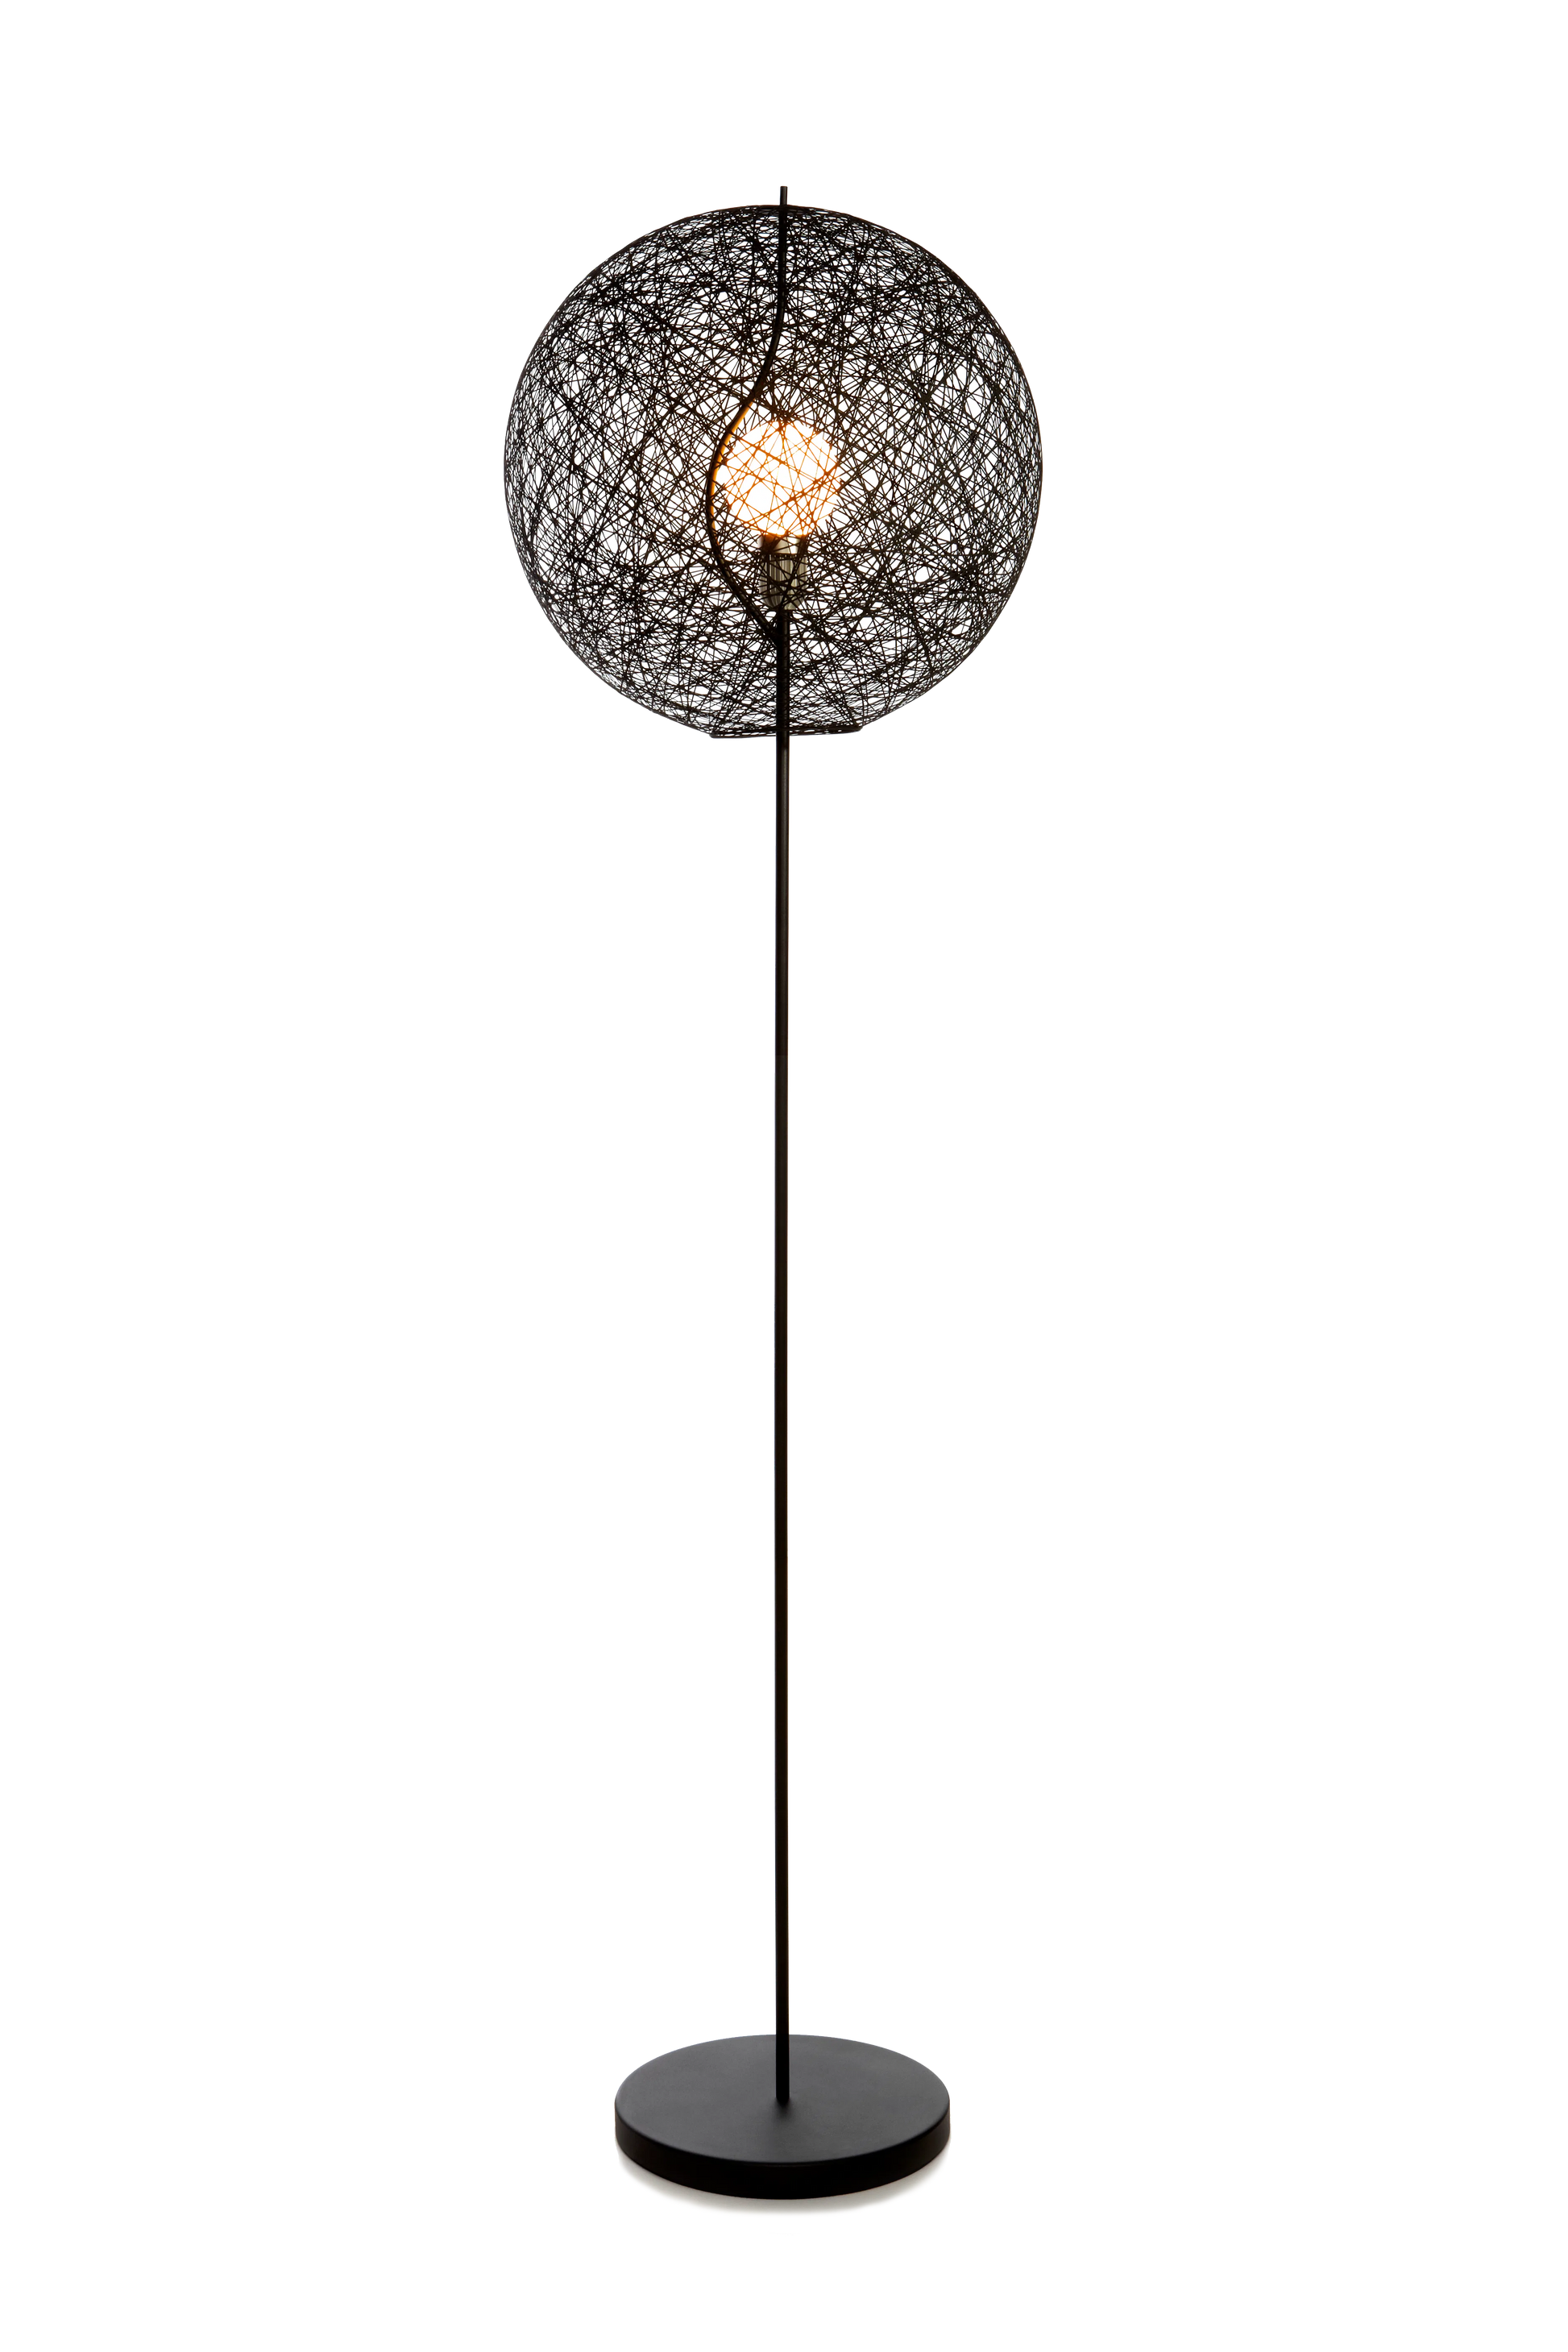 messy wire ball lights, round shape lights,  modern lighting, modern light fixtures, best modern luxury lighting, stylish lighting, vintage modern lighting, modern lighting websites, modern European Lighting, Lamps online